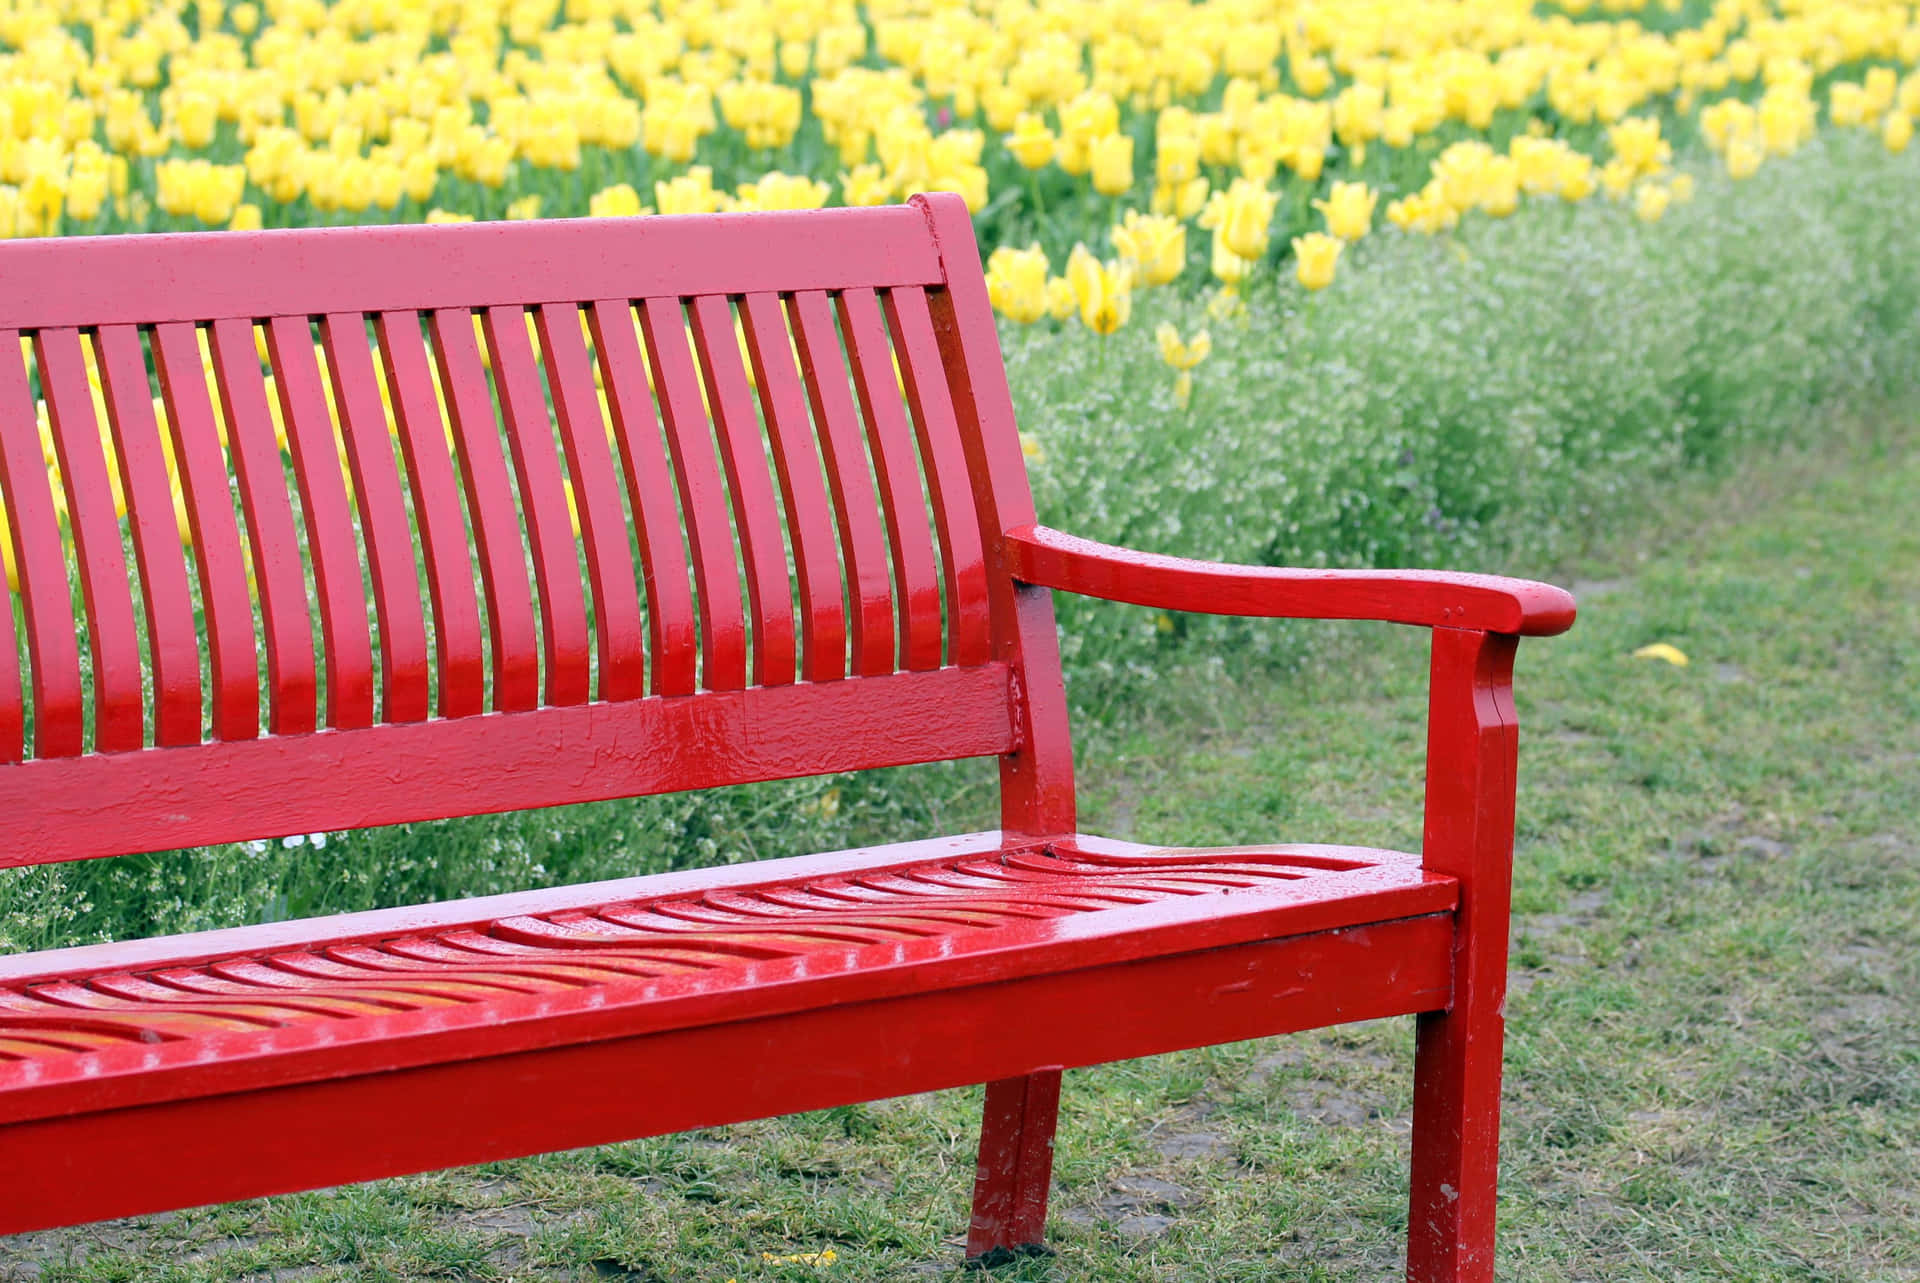 Take a Moment To Relax On This Wooden Bench